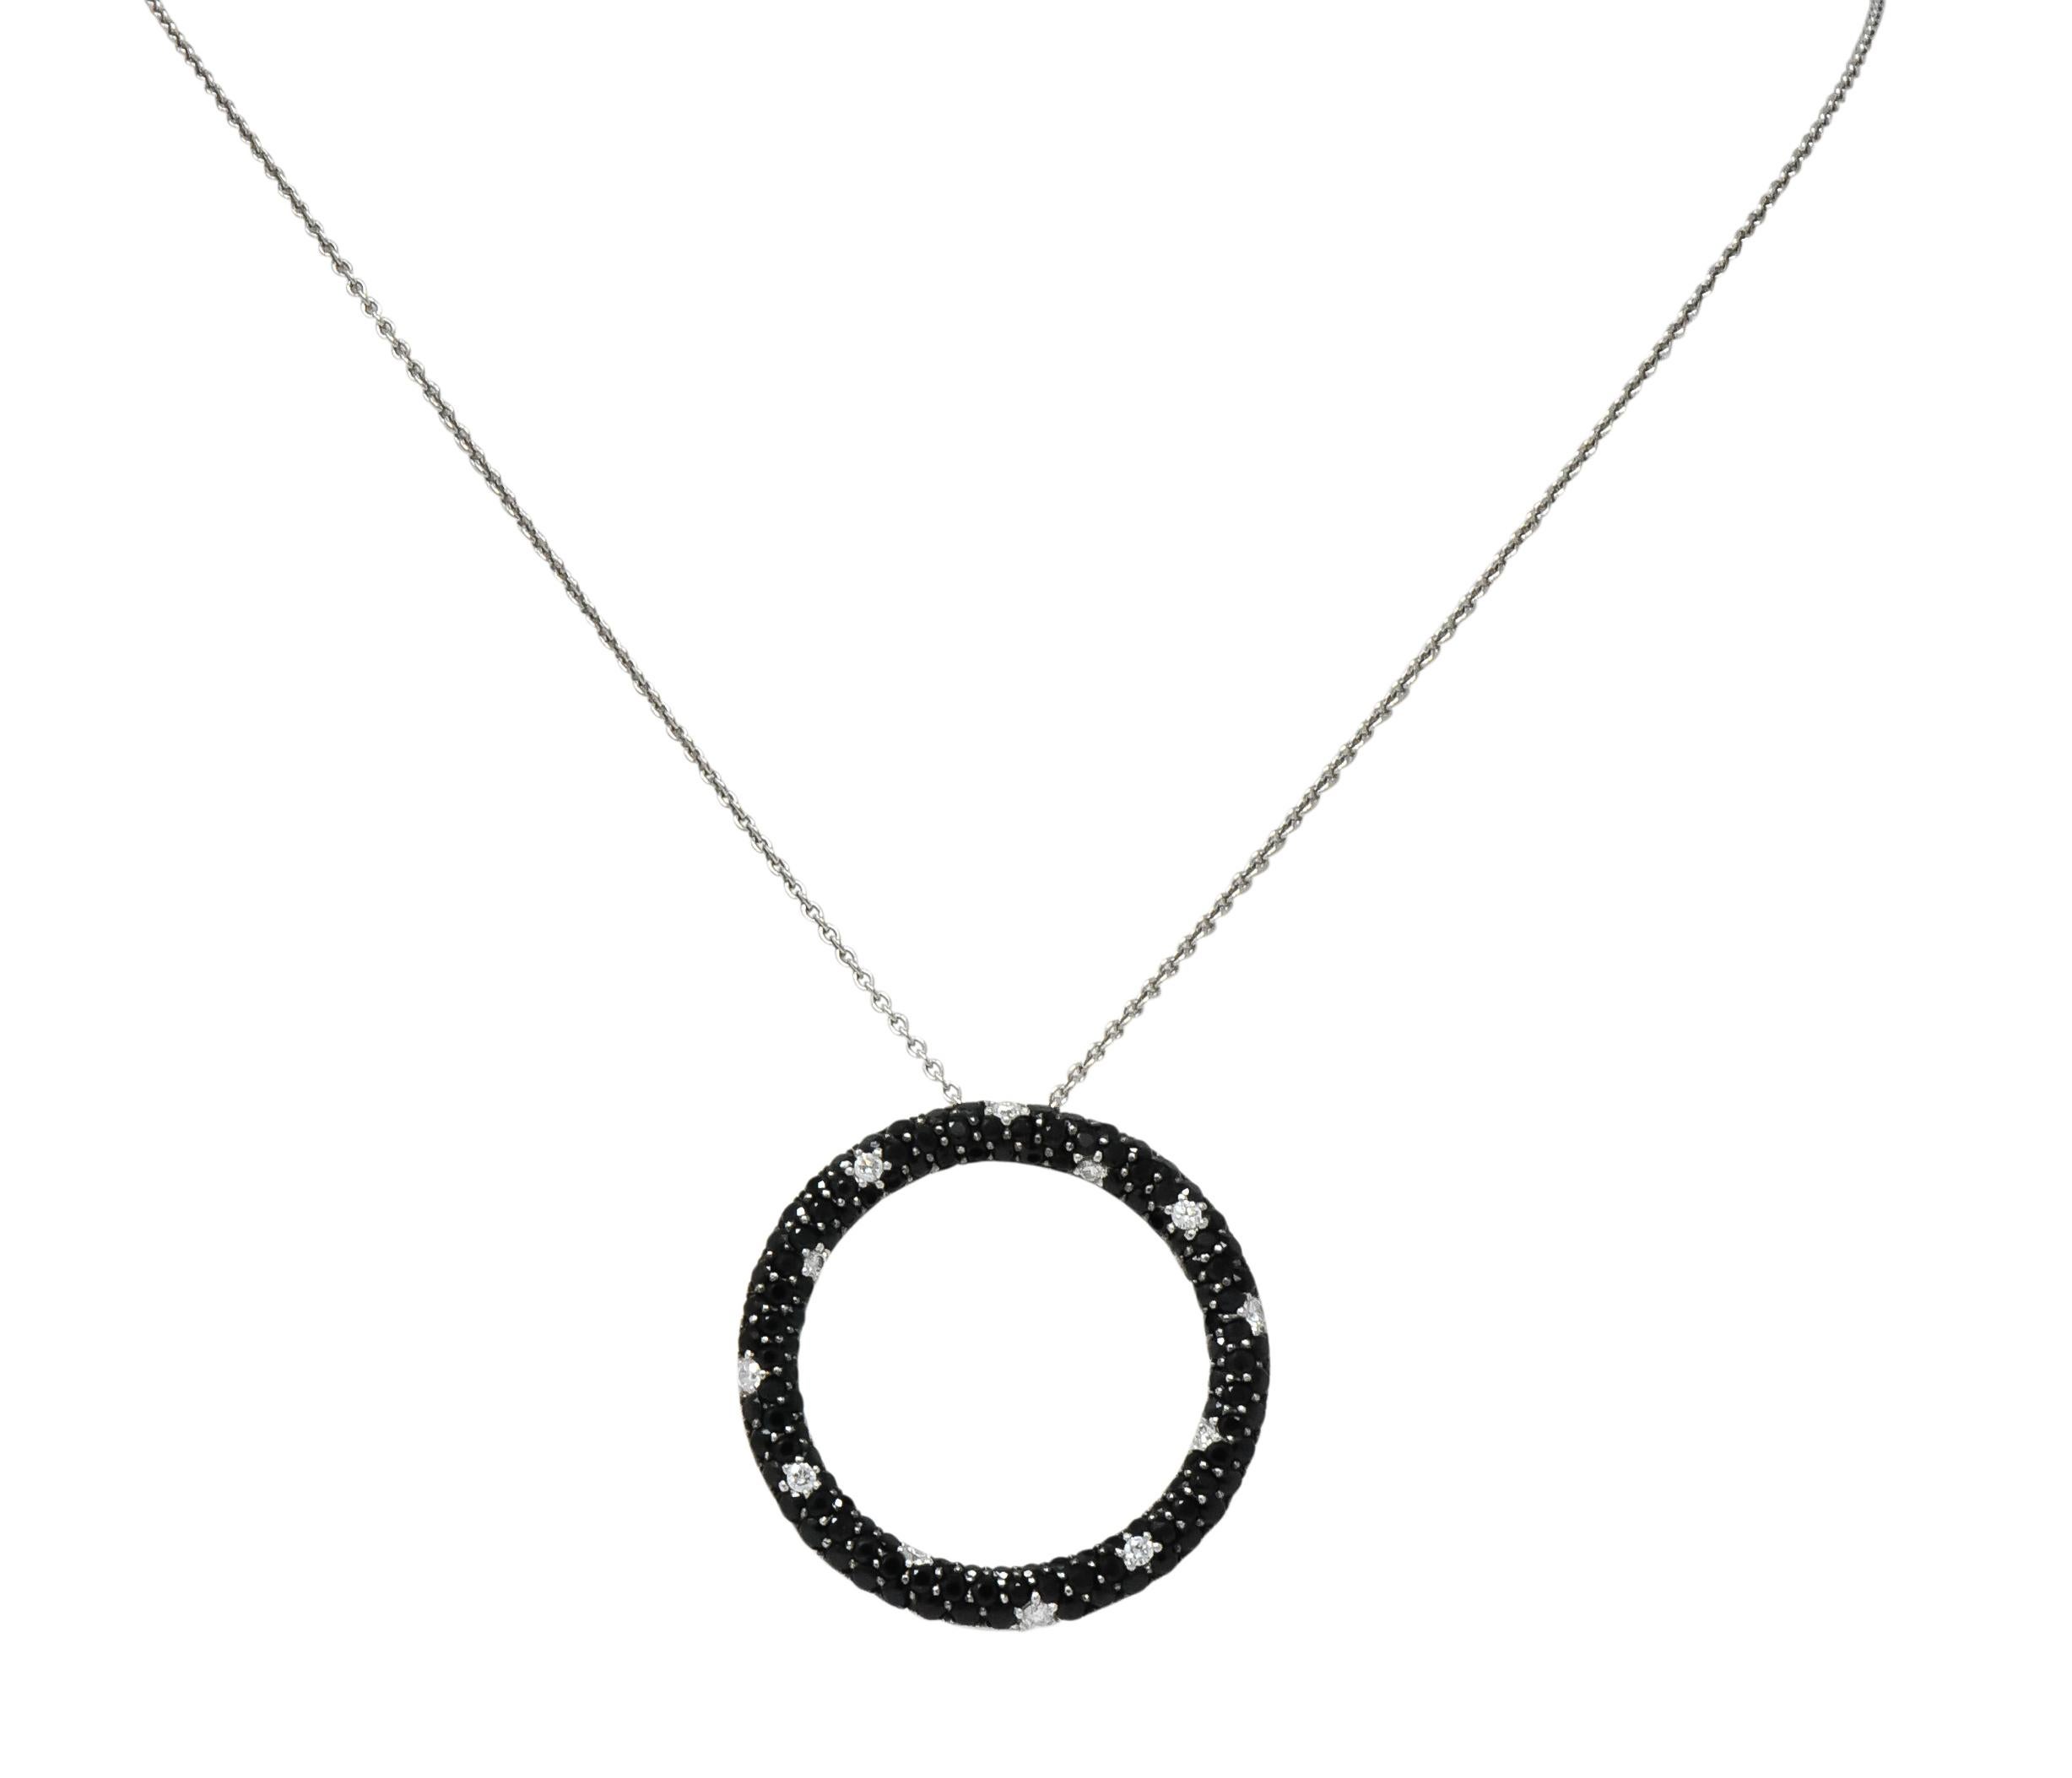 Designed as an open circle with pavé set round brilliant cut diamonds and black sapphires

Twelve diamonds weighing approximately 0.35 carat total, G/H color and VS clarity

One hundred twenty-six black sapphires weighing approximately 4.50 carats